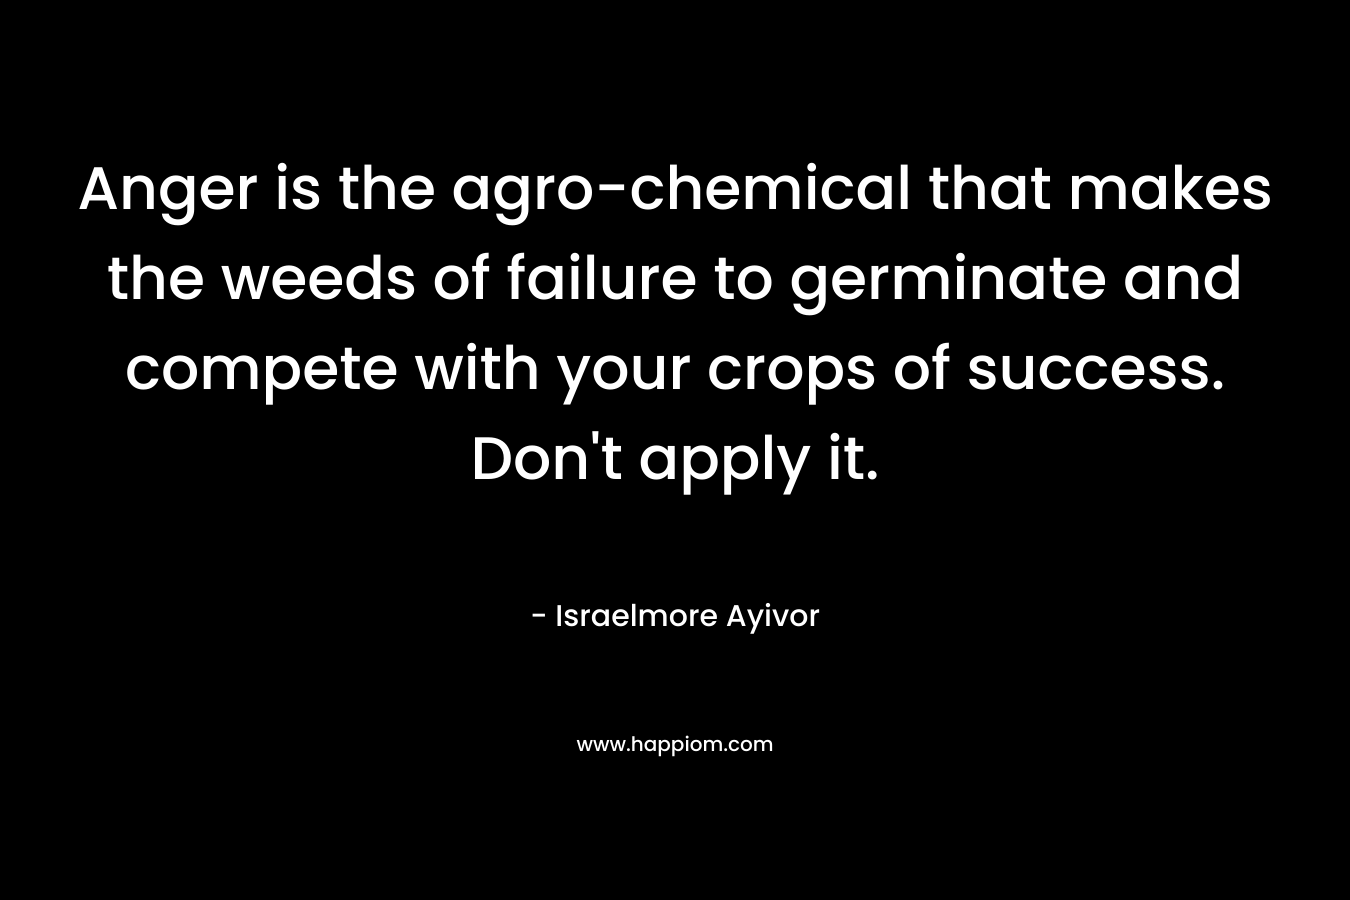 Anger is the agro-chemical that makes the weeds of failure to germinate and compete with your crops of success. Don't apply it.